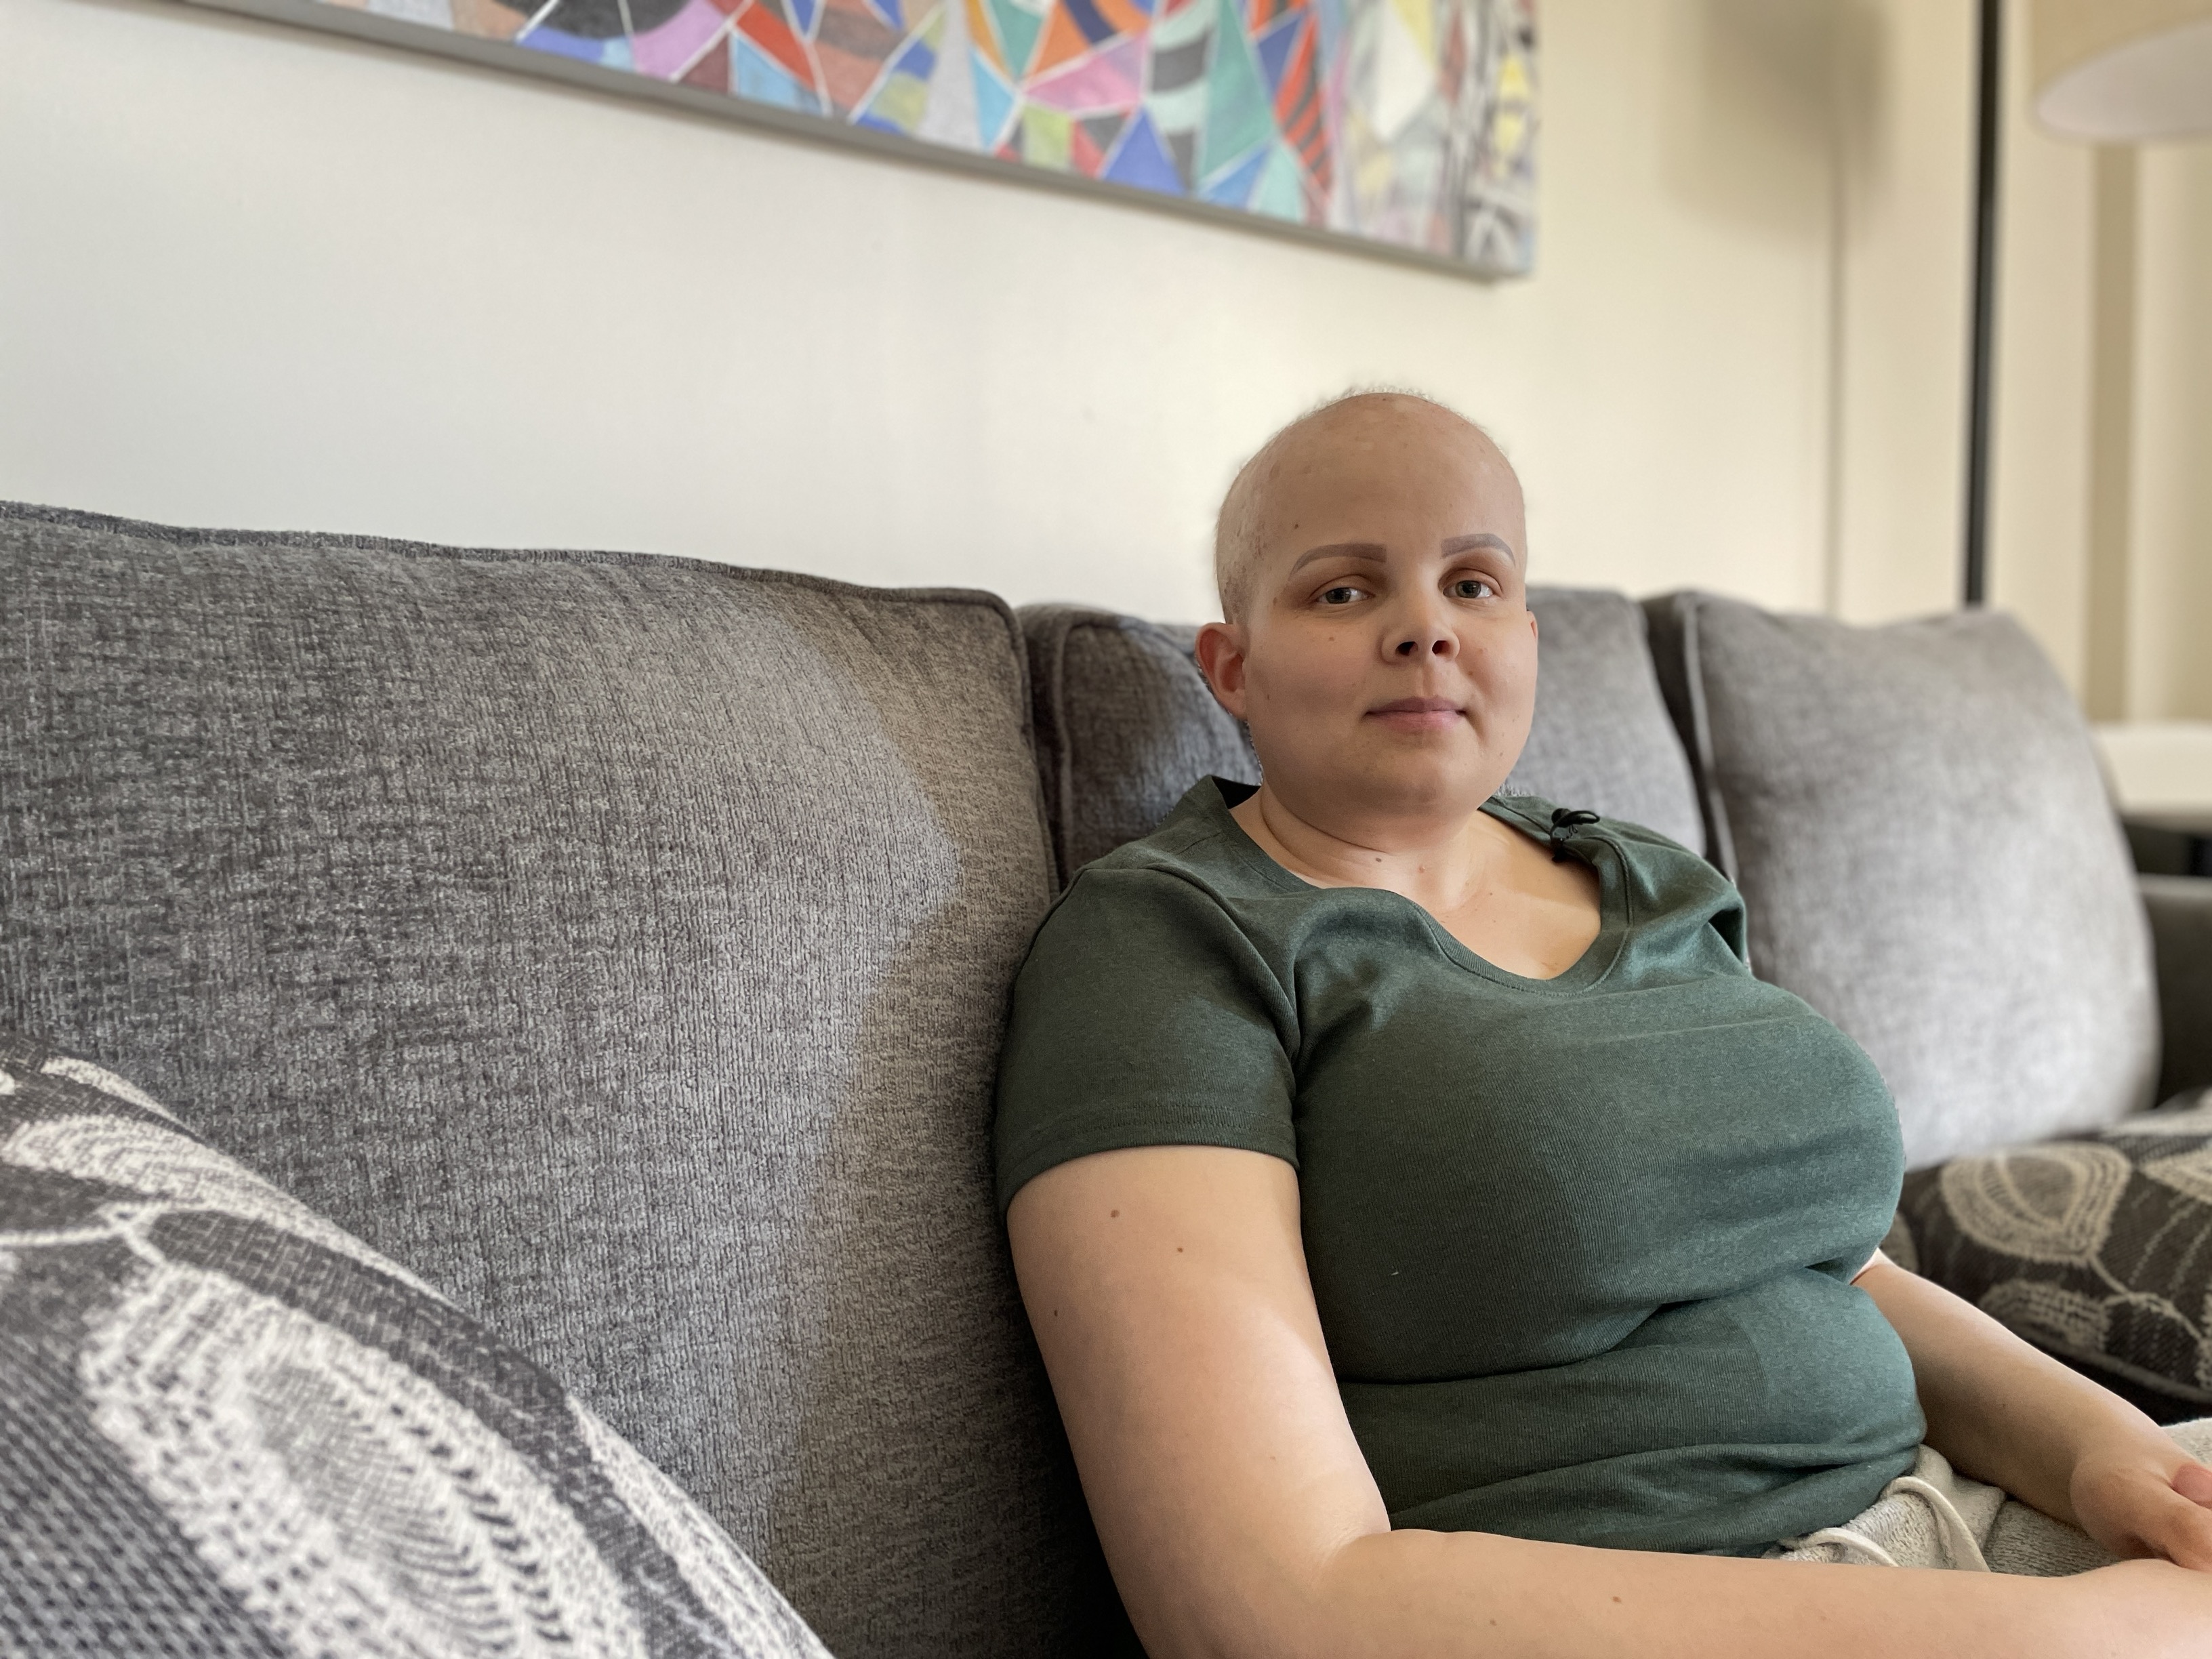 Halifax woman battling cancer scammed out of $5K: ‘She has no money left’